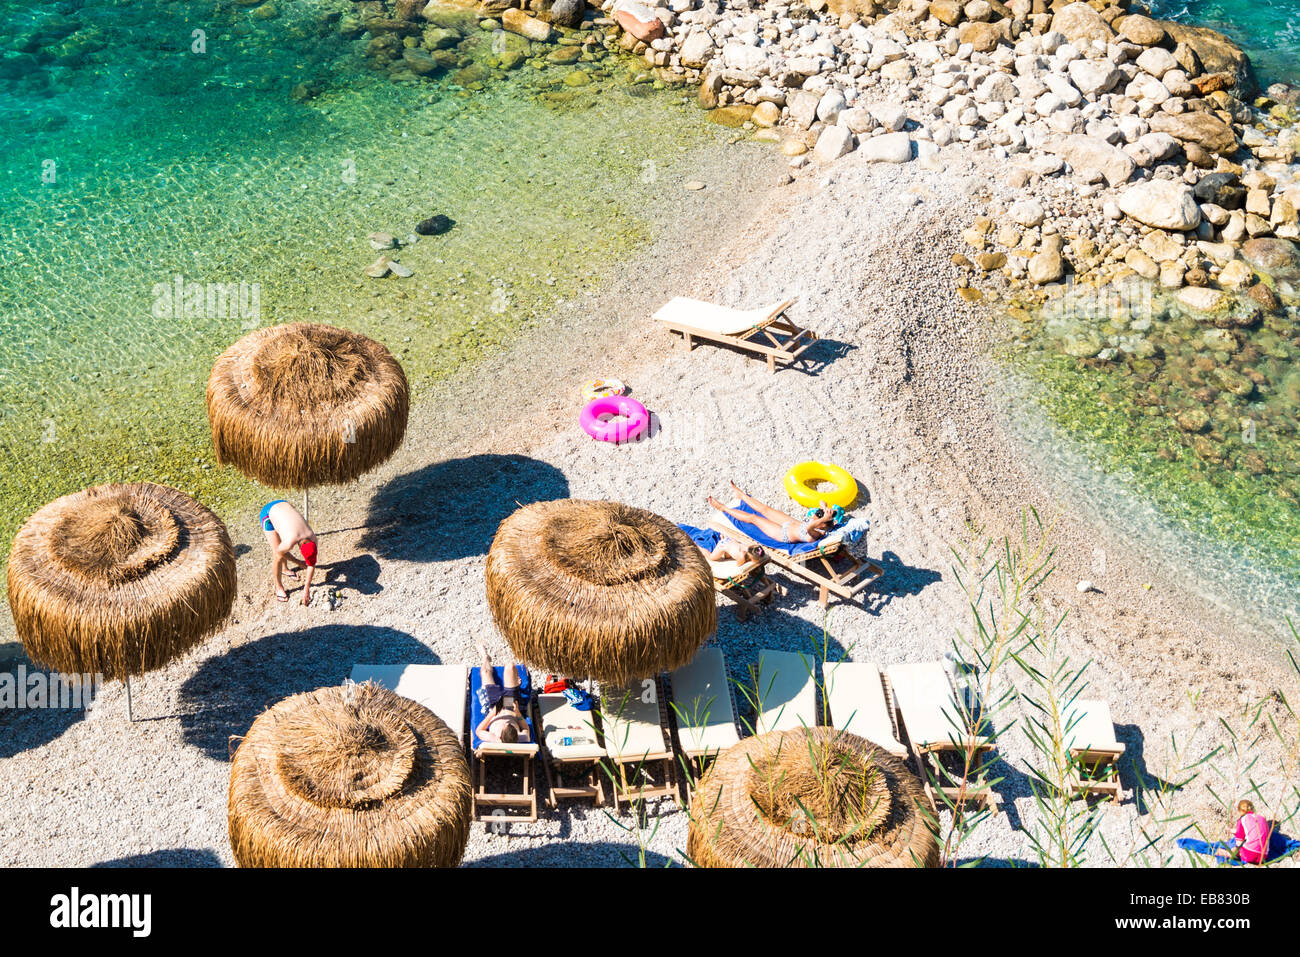 OELUEDENIZ, TURKEY - OCTOBER 20, 2014: People at the beach with sunbeds and parasols seen from above in the luxurious holiday re Stock Photo